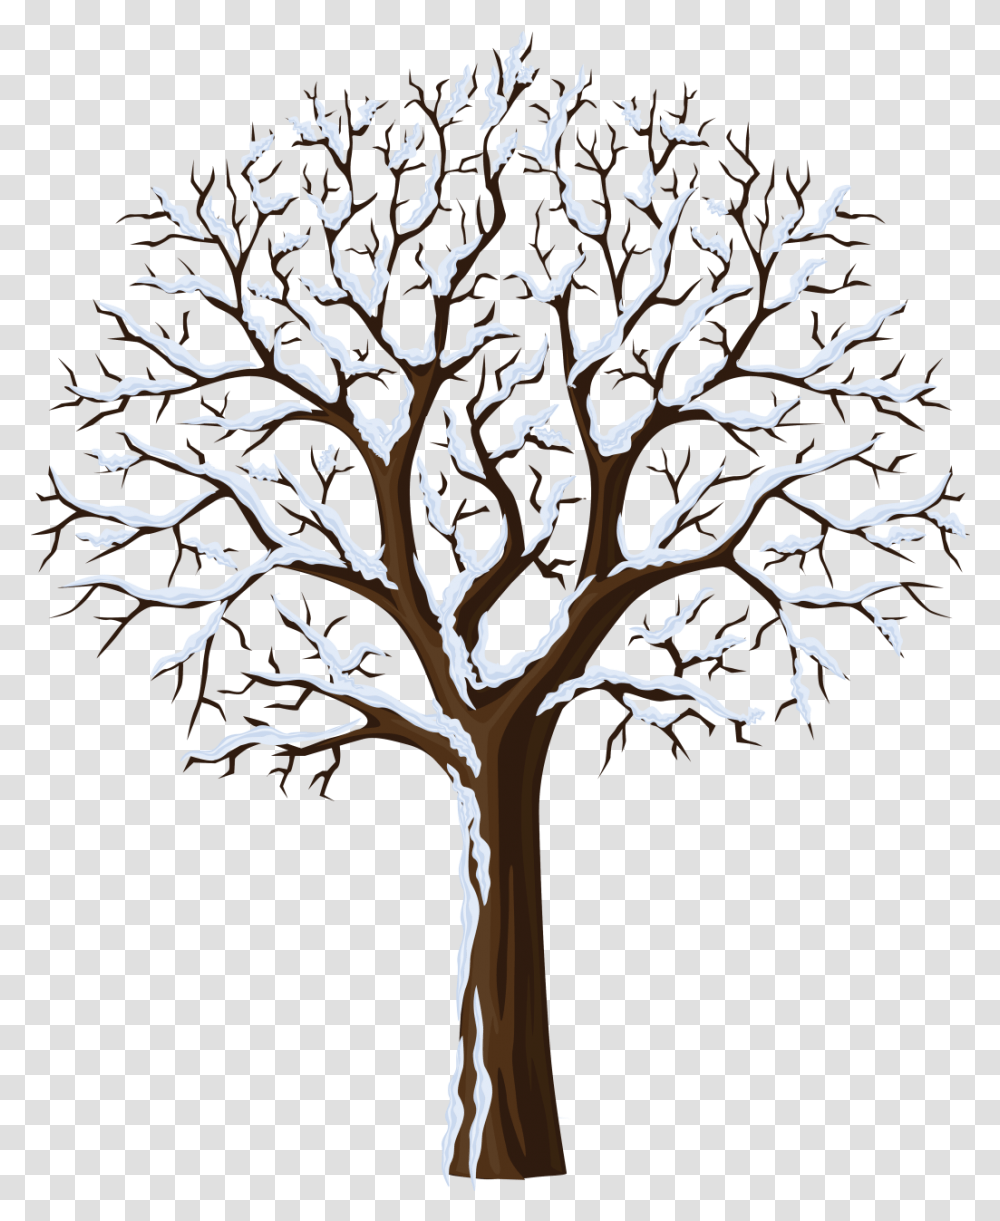 January Clipart Snowtree Plants In Different Seasons, Nature, Outdoors, Vegetation, Tree Trunk Transparent Png